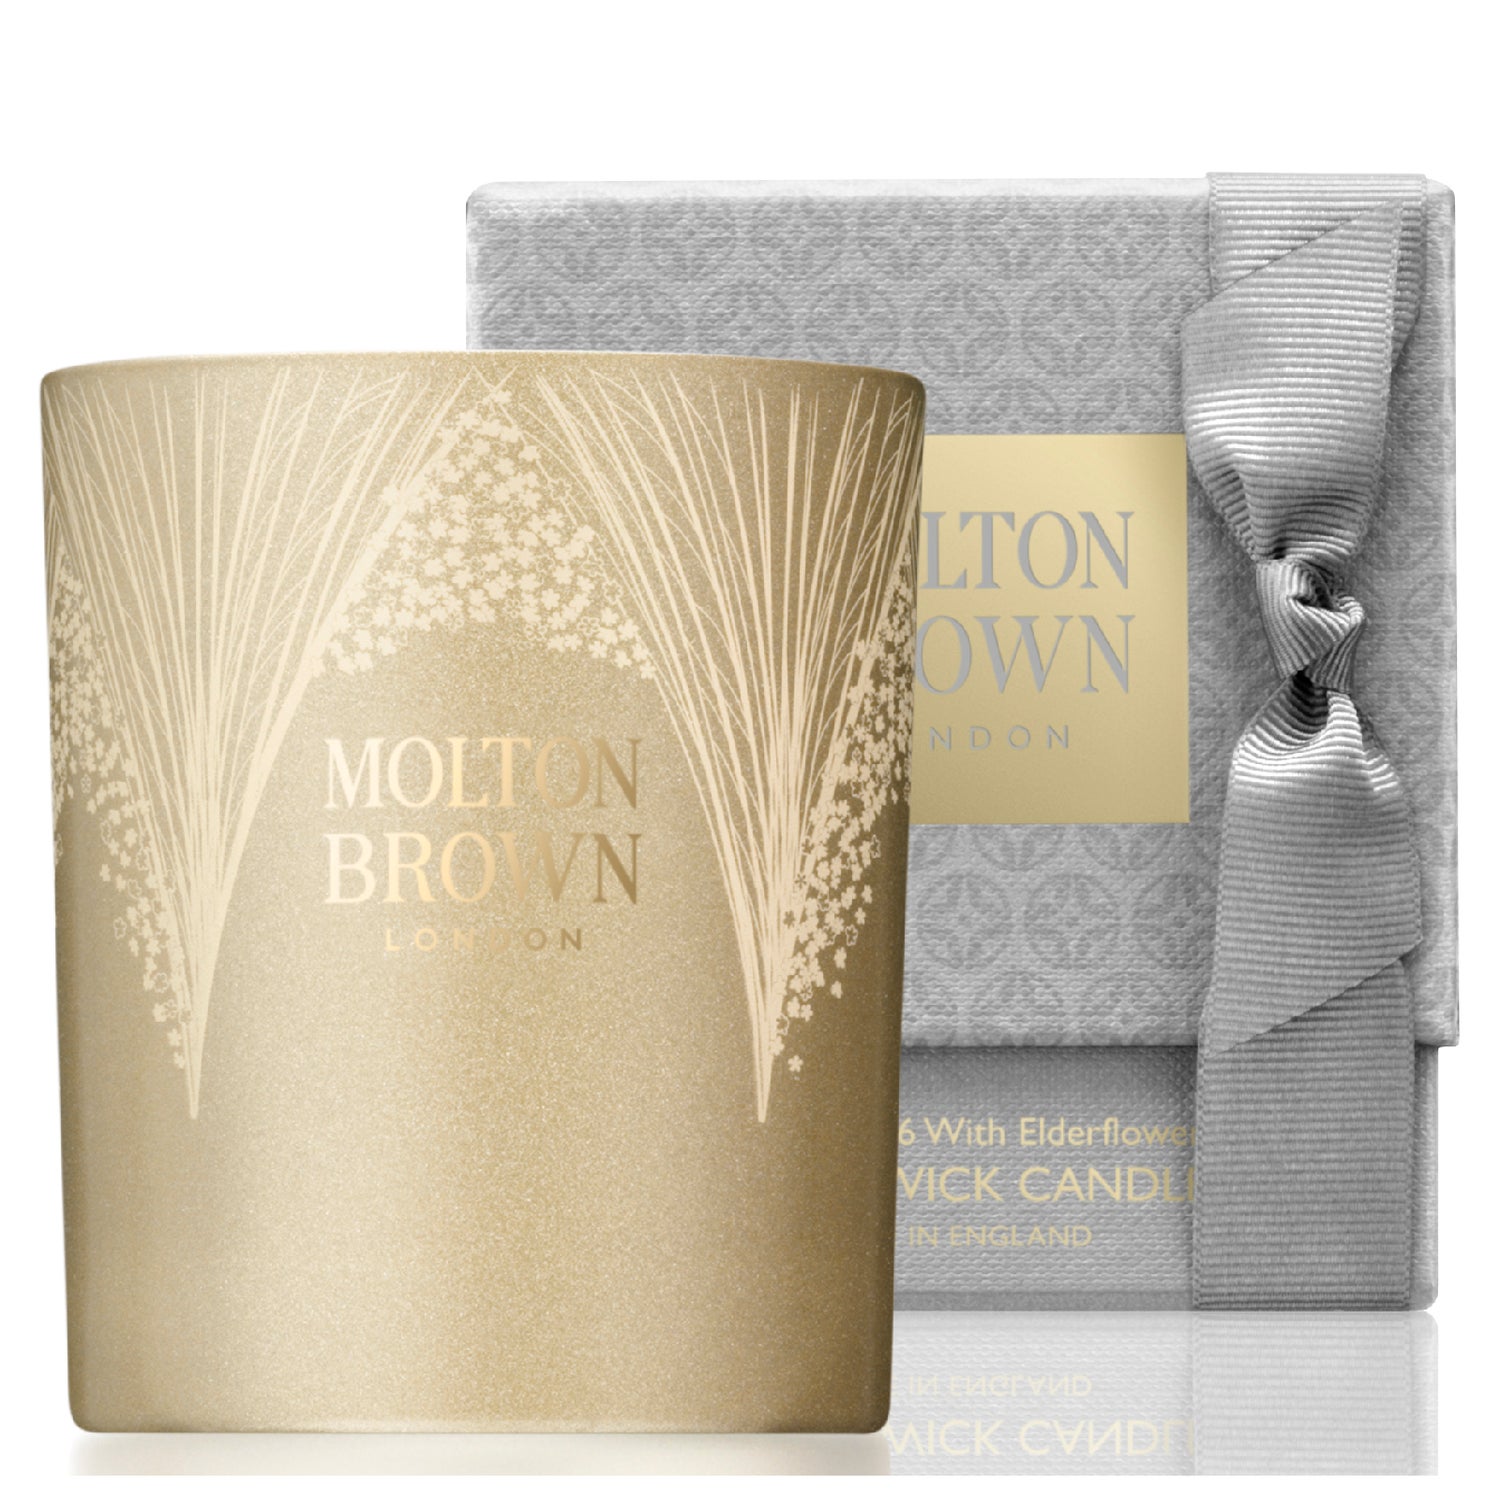 Molton Brown Vintage 2016 with Elderflower Single Wick Candle